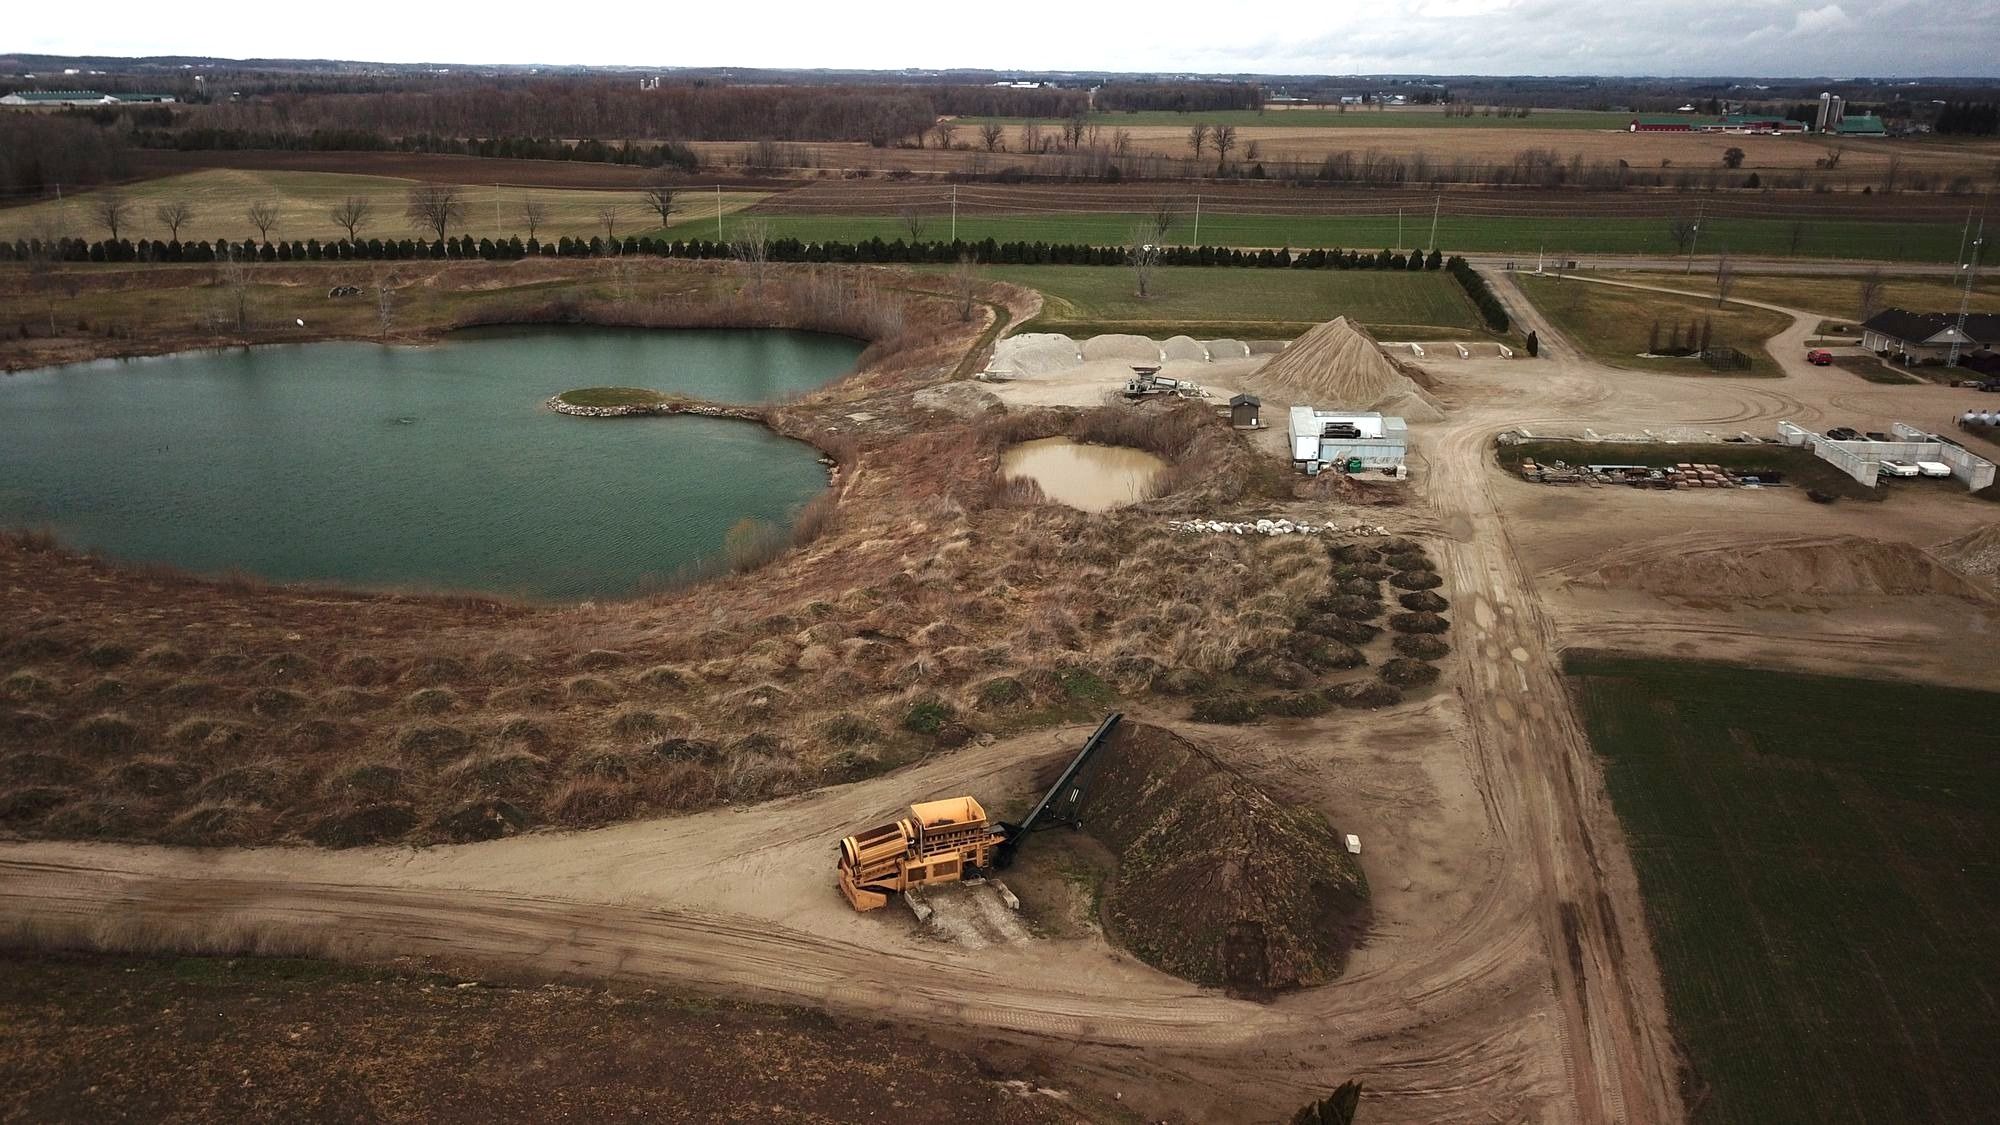 Plans to loosen gravel pit rules raise some red flags